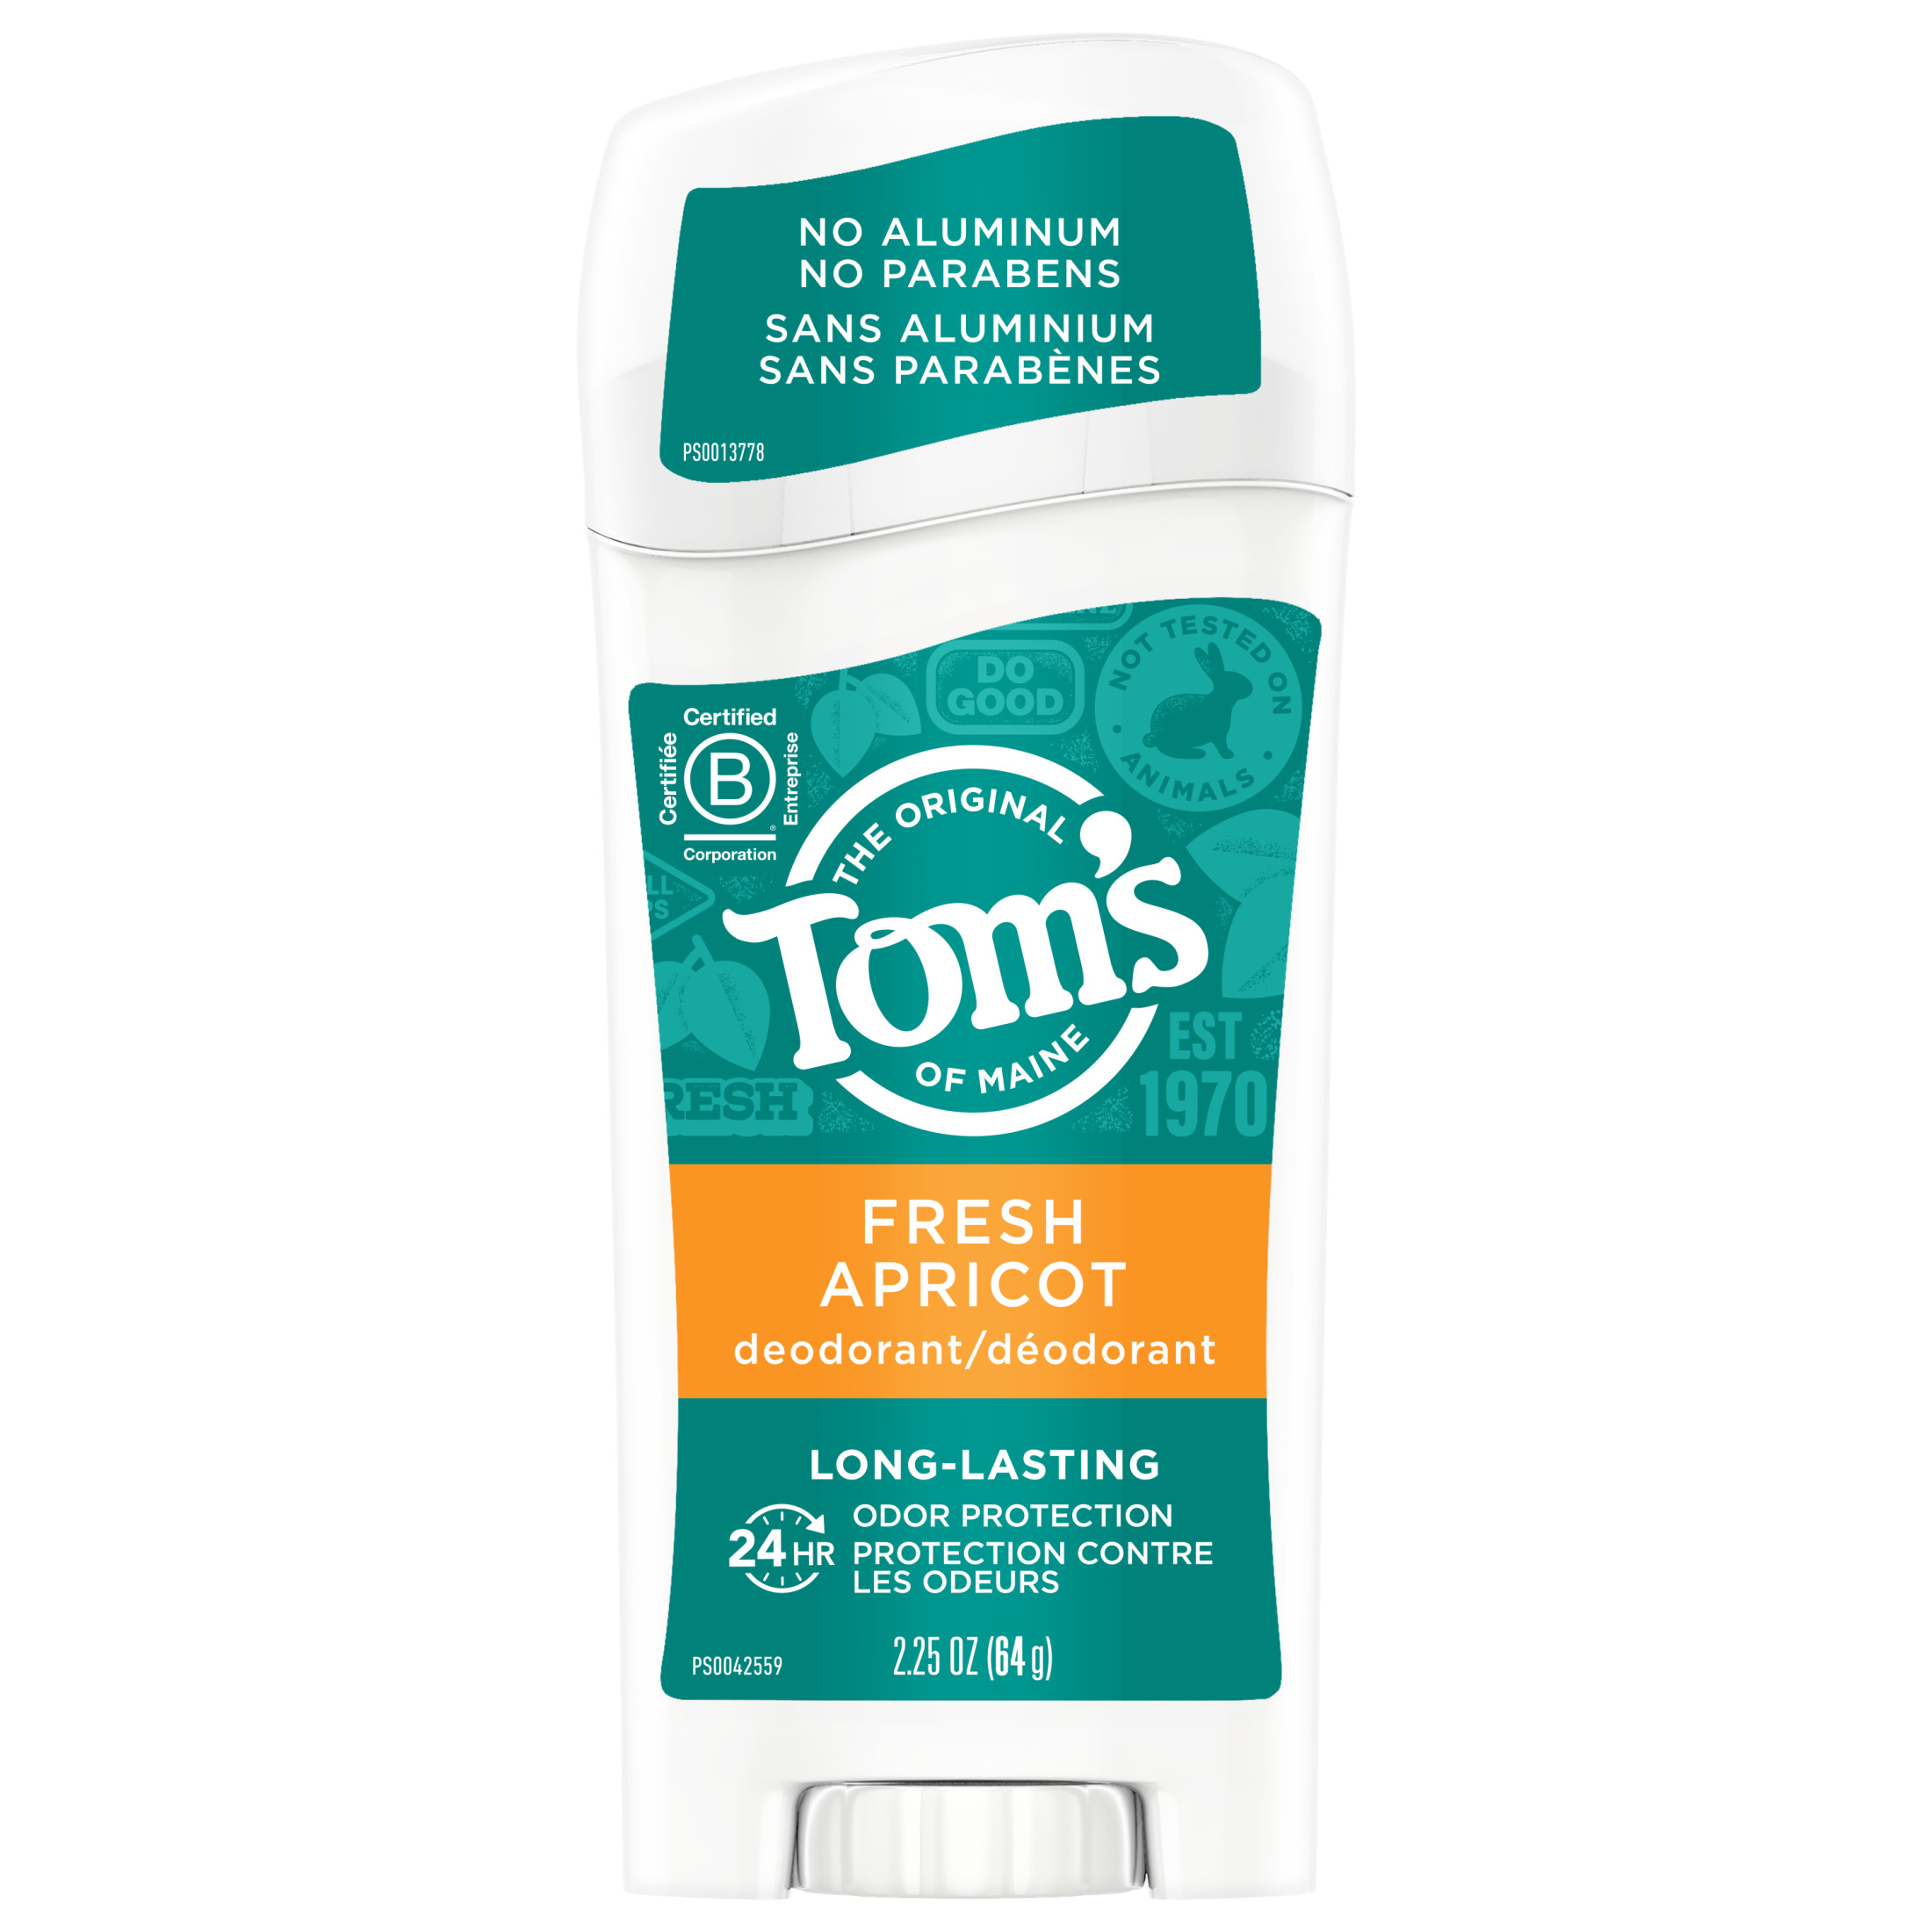 Tom's of Maine Long-Lasting Aluminum-Free Natural Deodorant for Women, Fresh Apricot, 2.25 oz - image 1 of 8